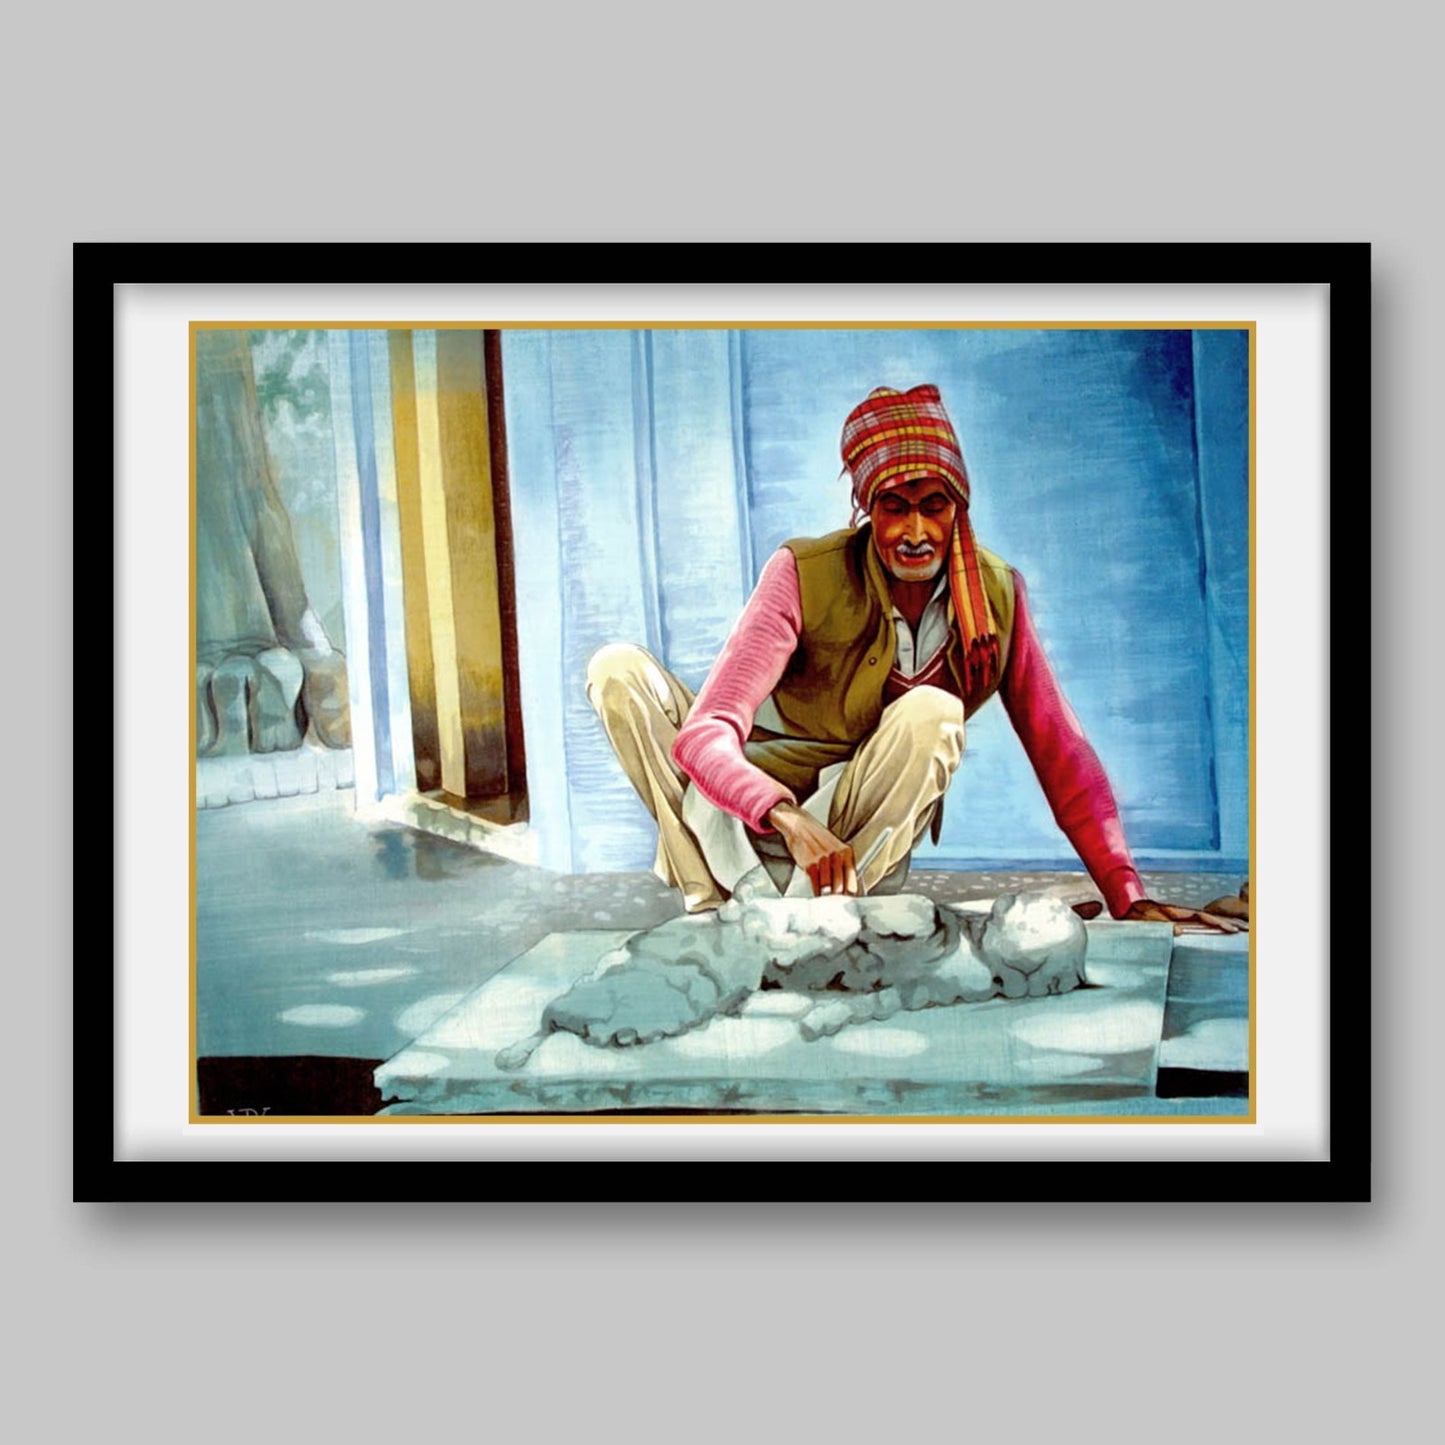 Construction Worker India - High Quality Print of Artwork by Pieter Weltevrede